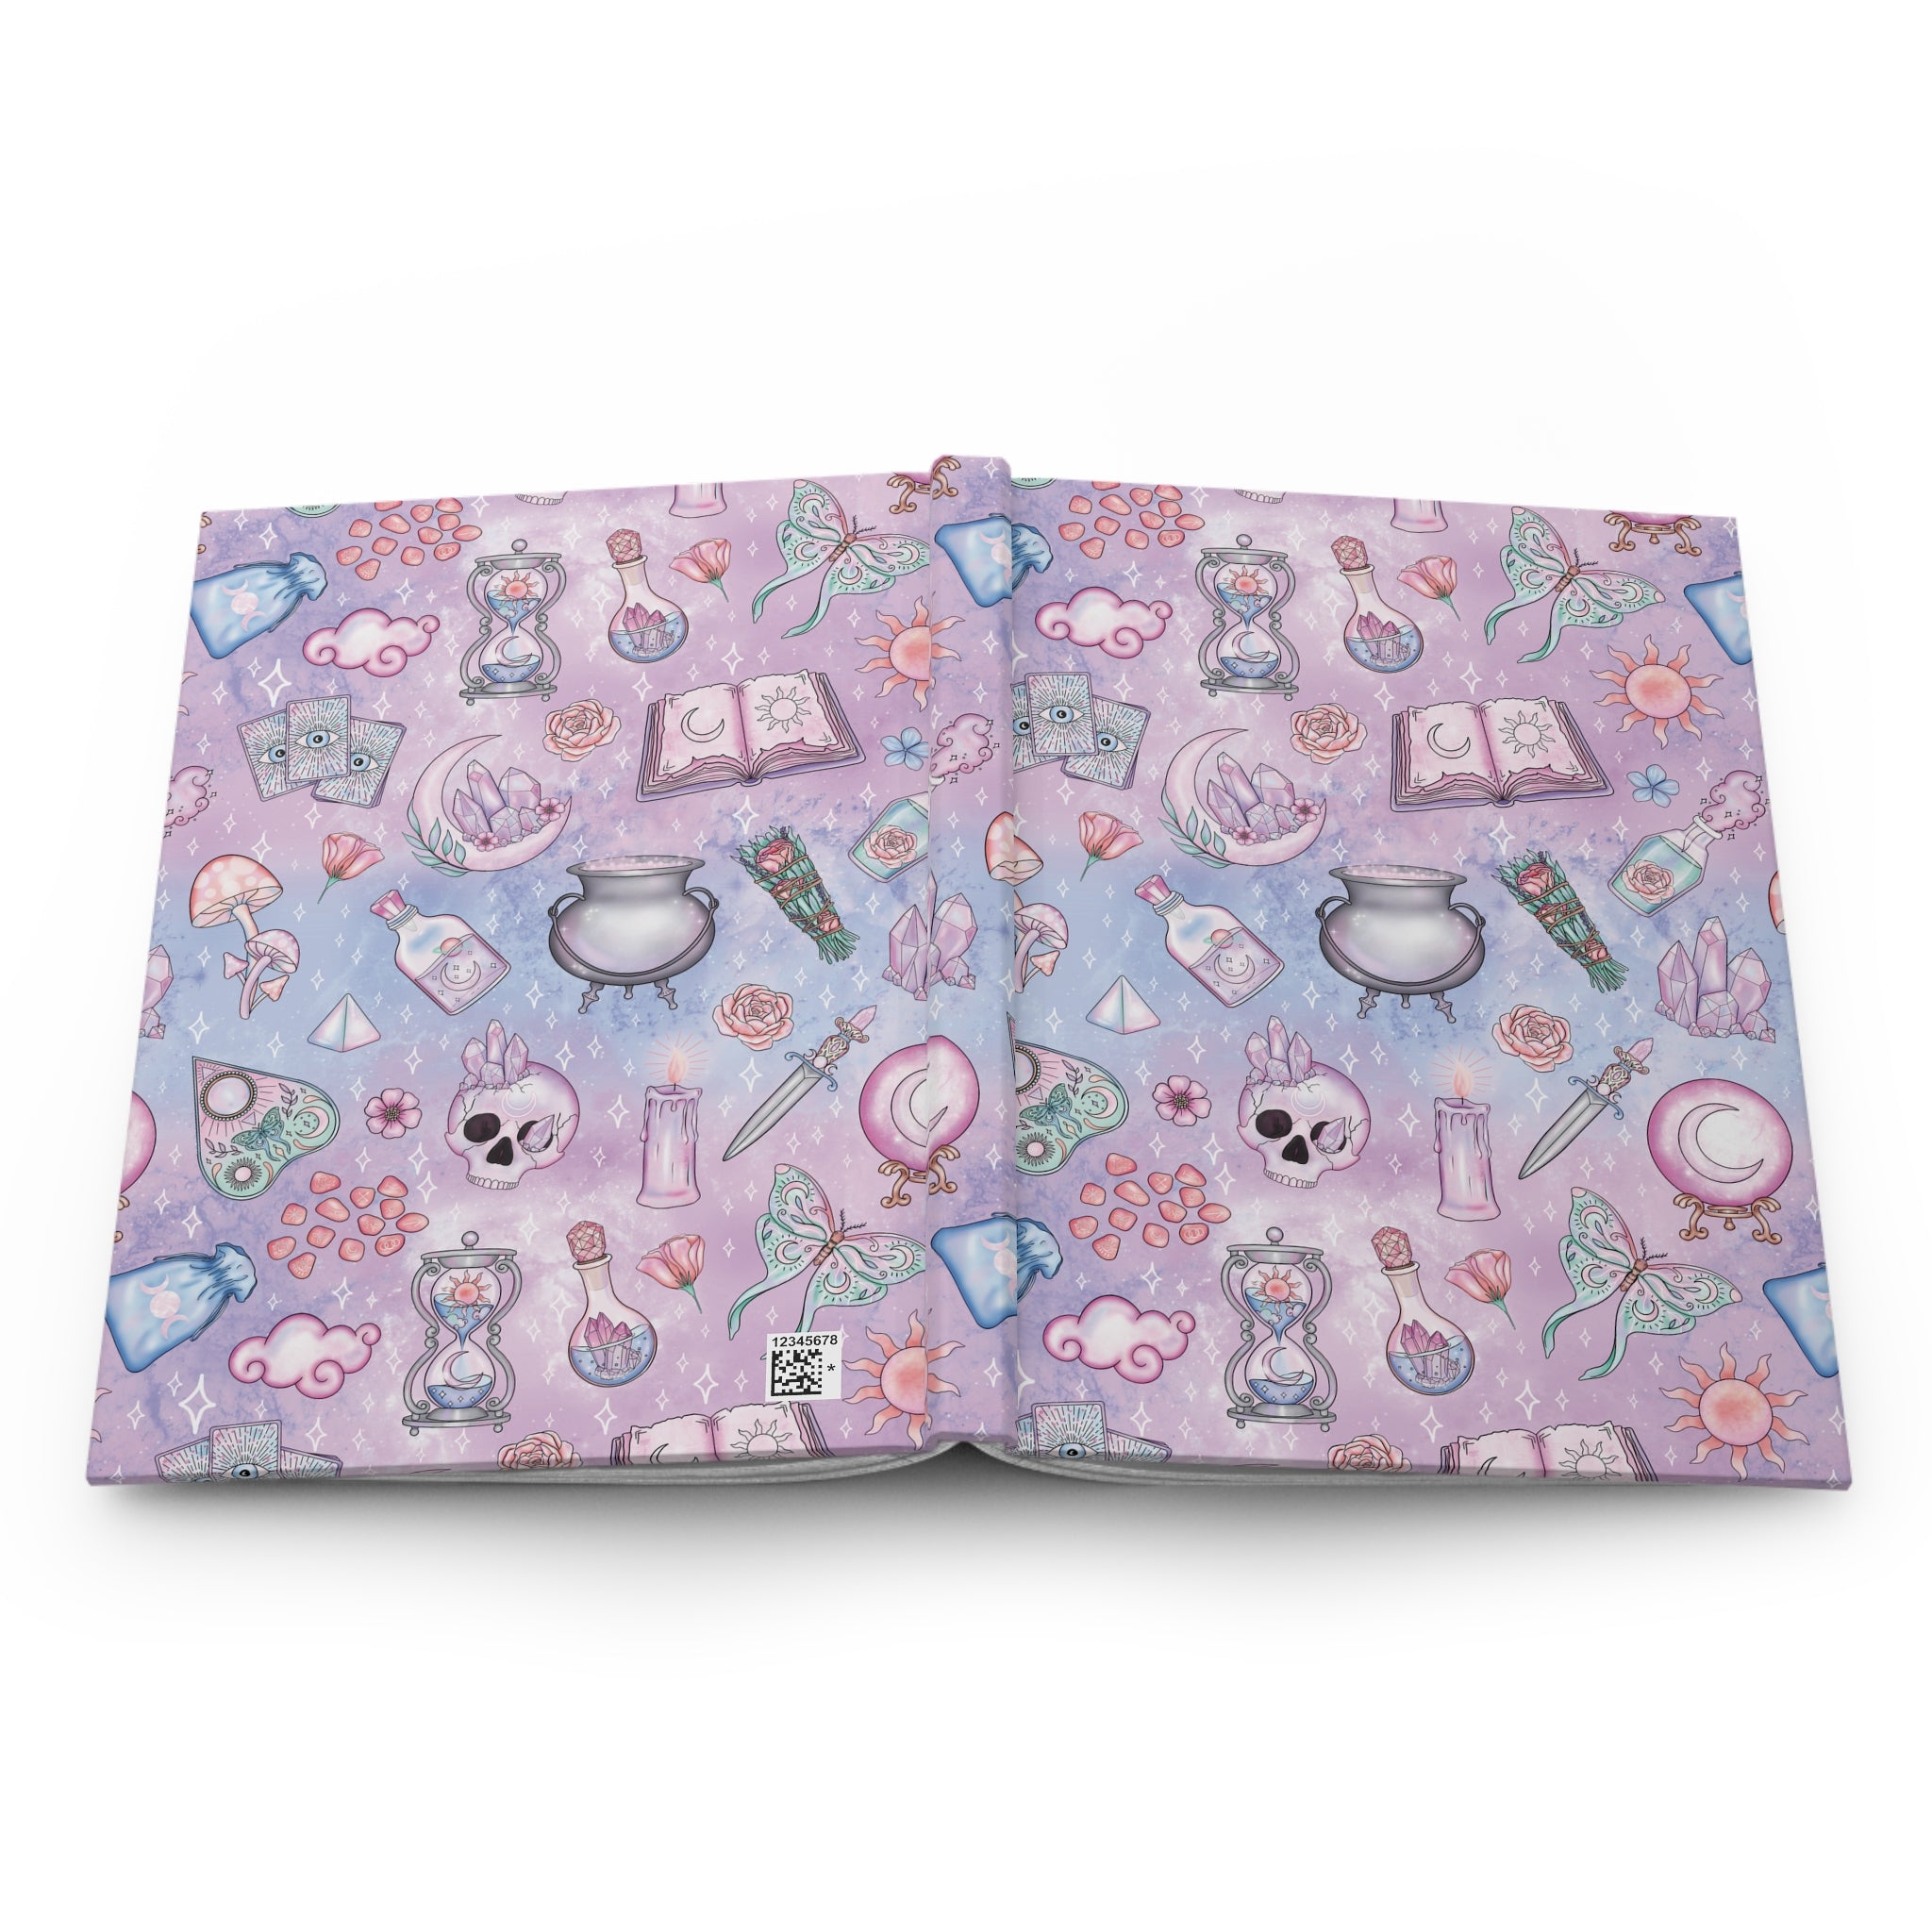 Kawaii Pastel Goth Witchy Whimsigoth Pink & Blue Hardcover Matte Journal